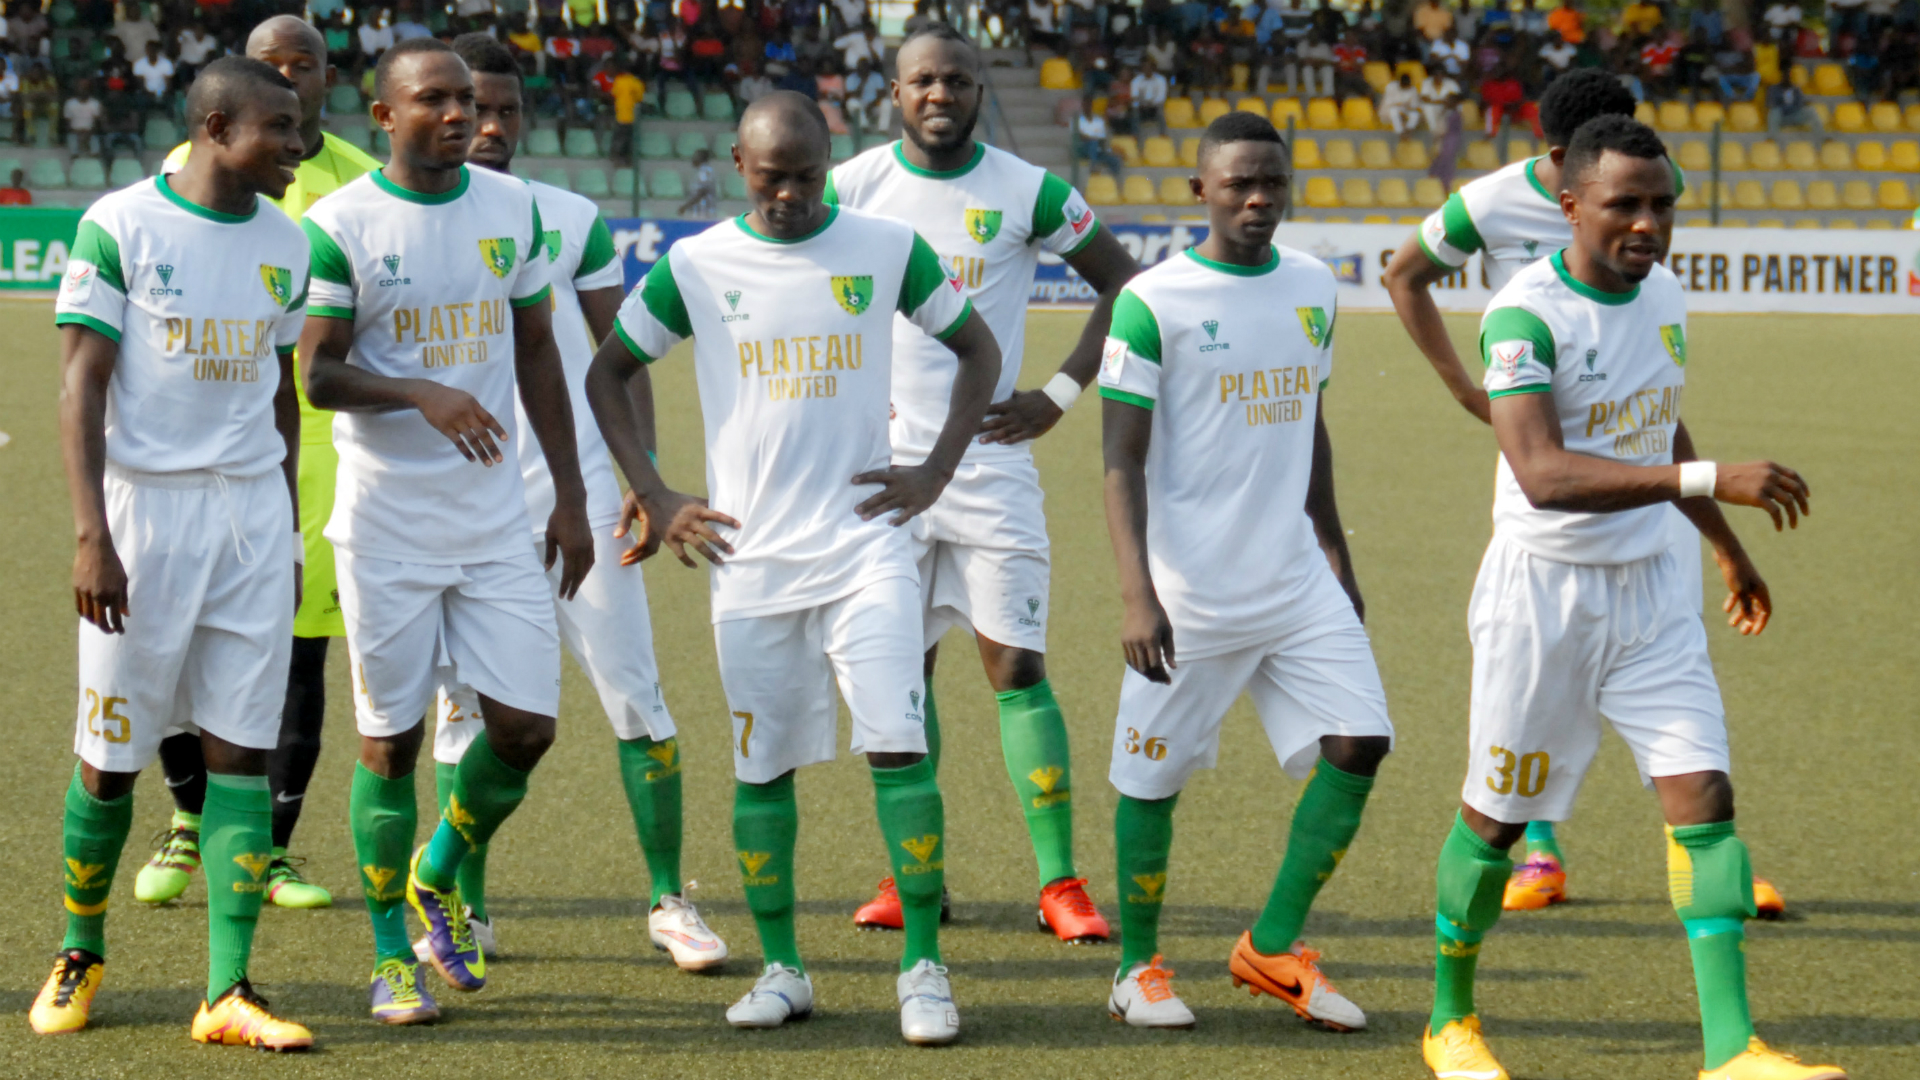 Plateau United dismiss 17 players in massive clear-out ahead of new season